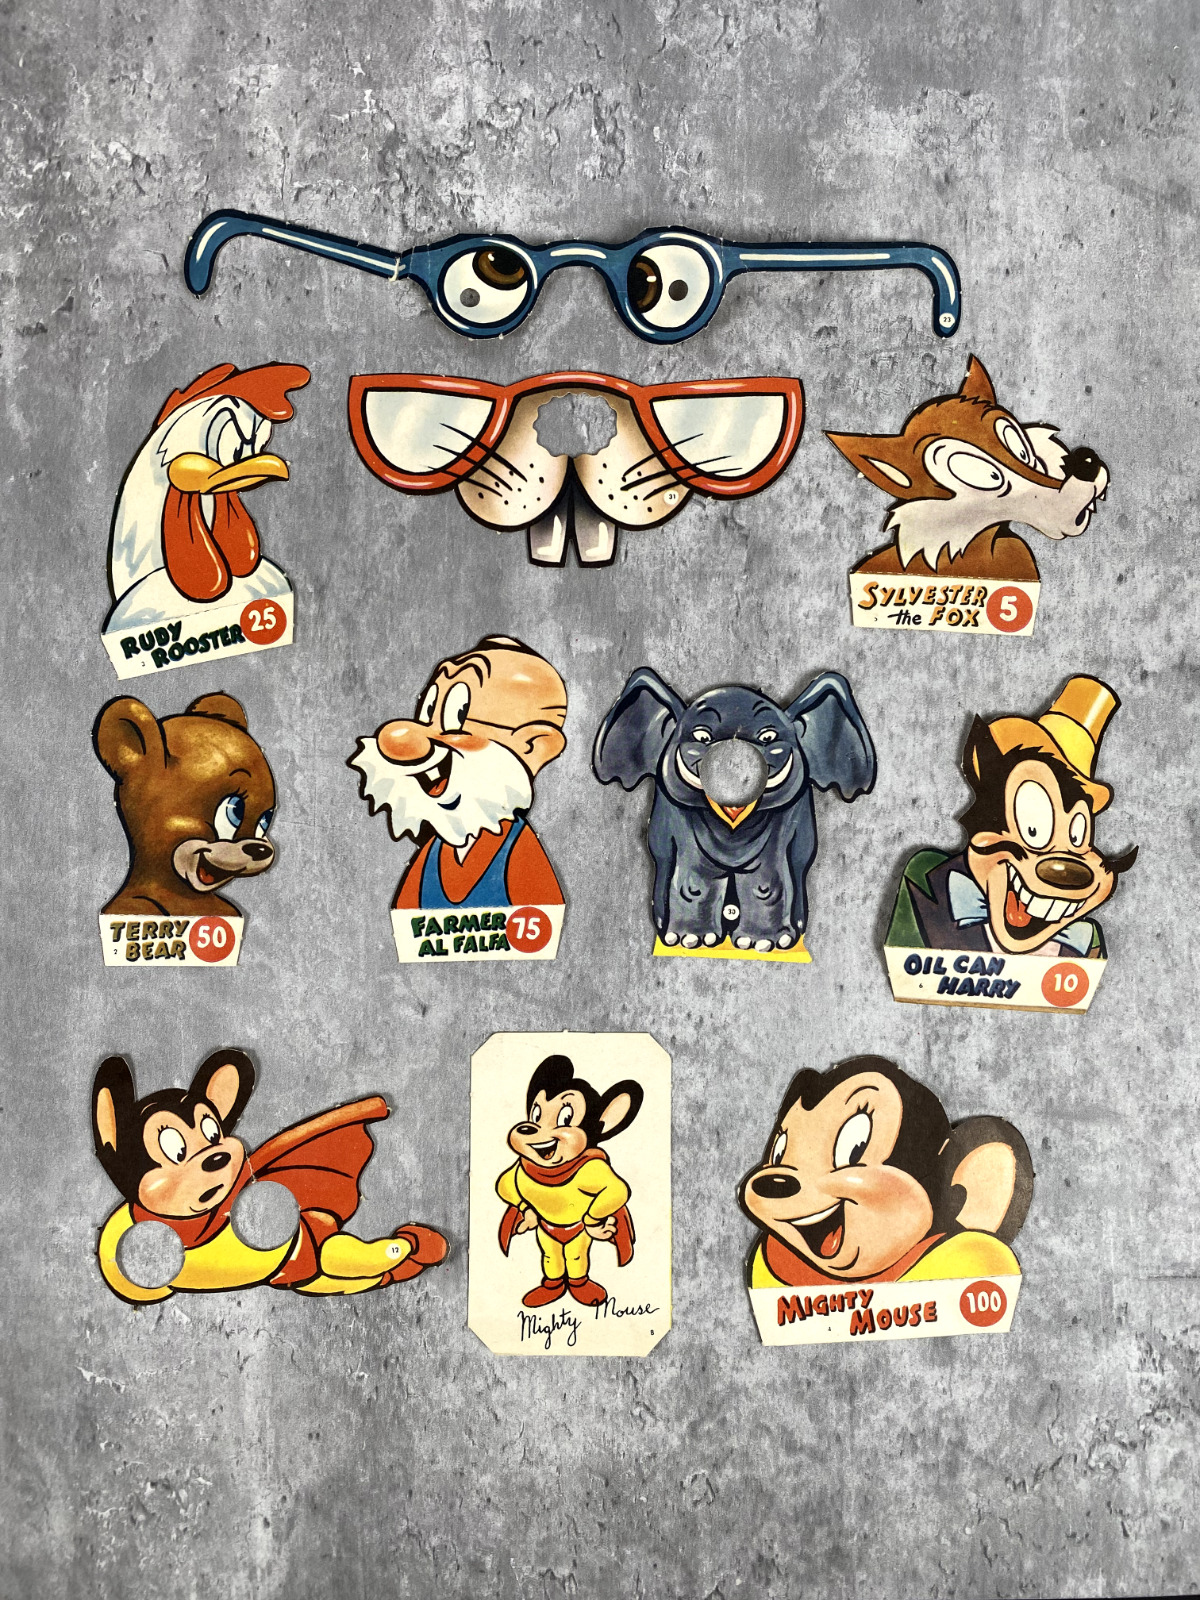 Vintage 1956 Terrytoons Merry Pack Fan Club Mighty Mouse Cutouts Sylverster Fox